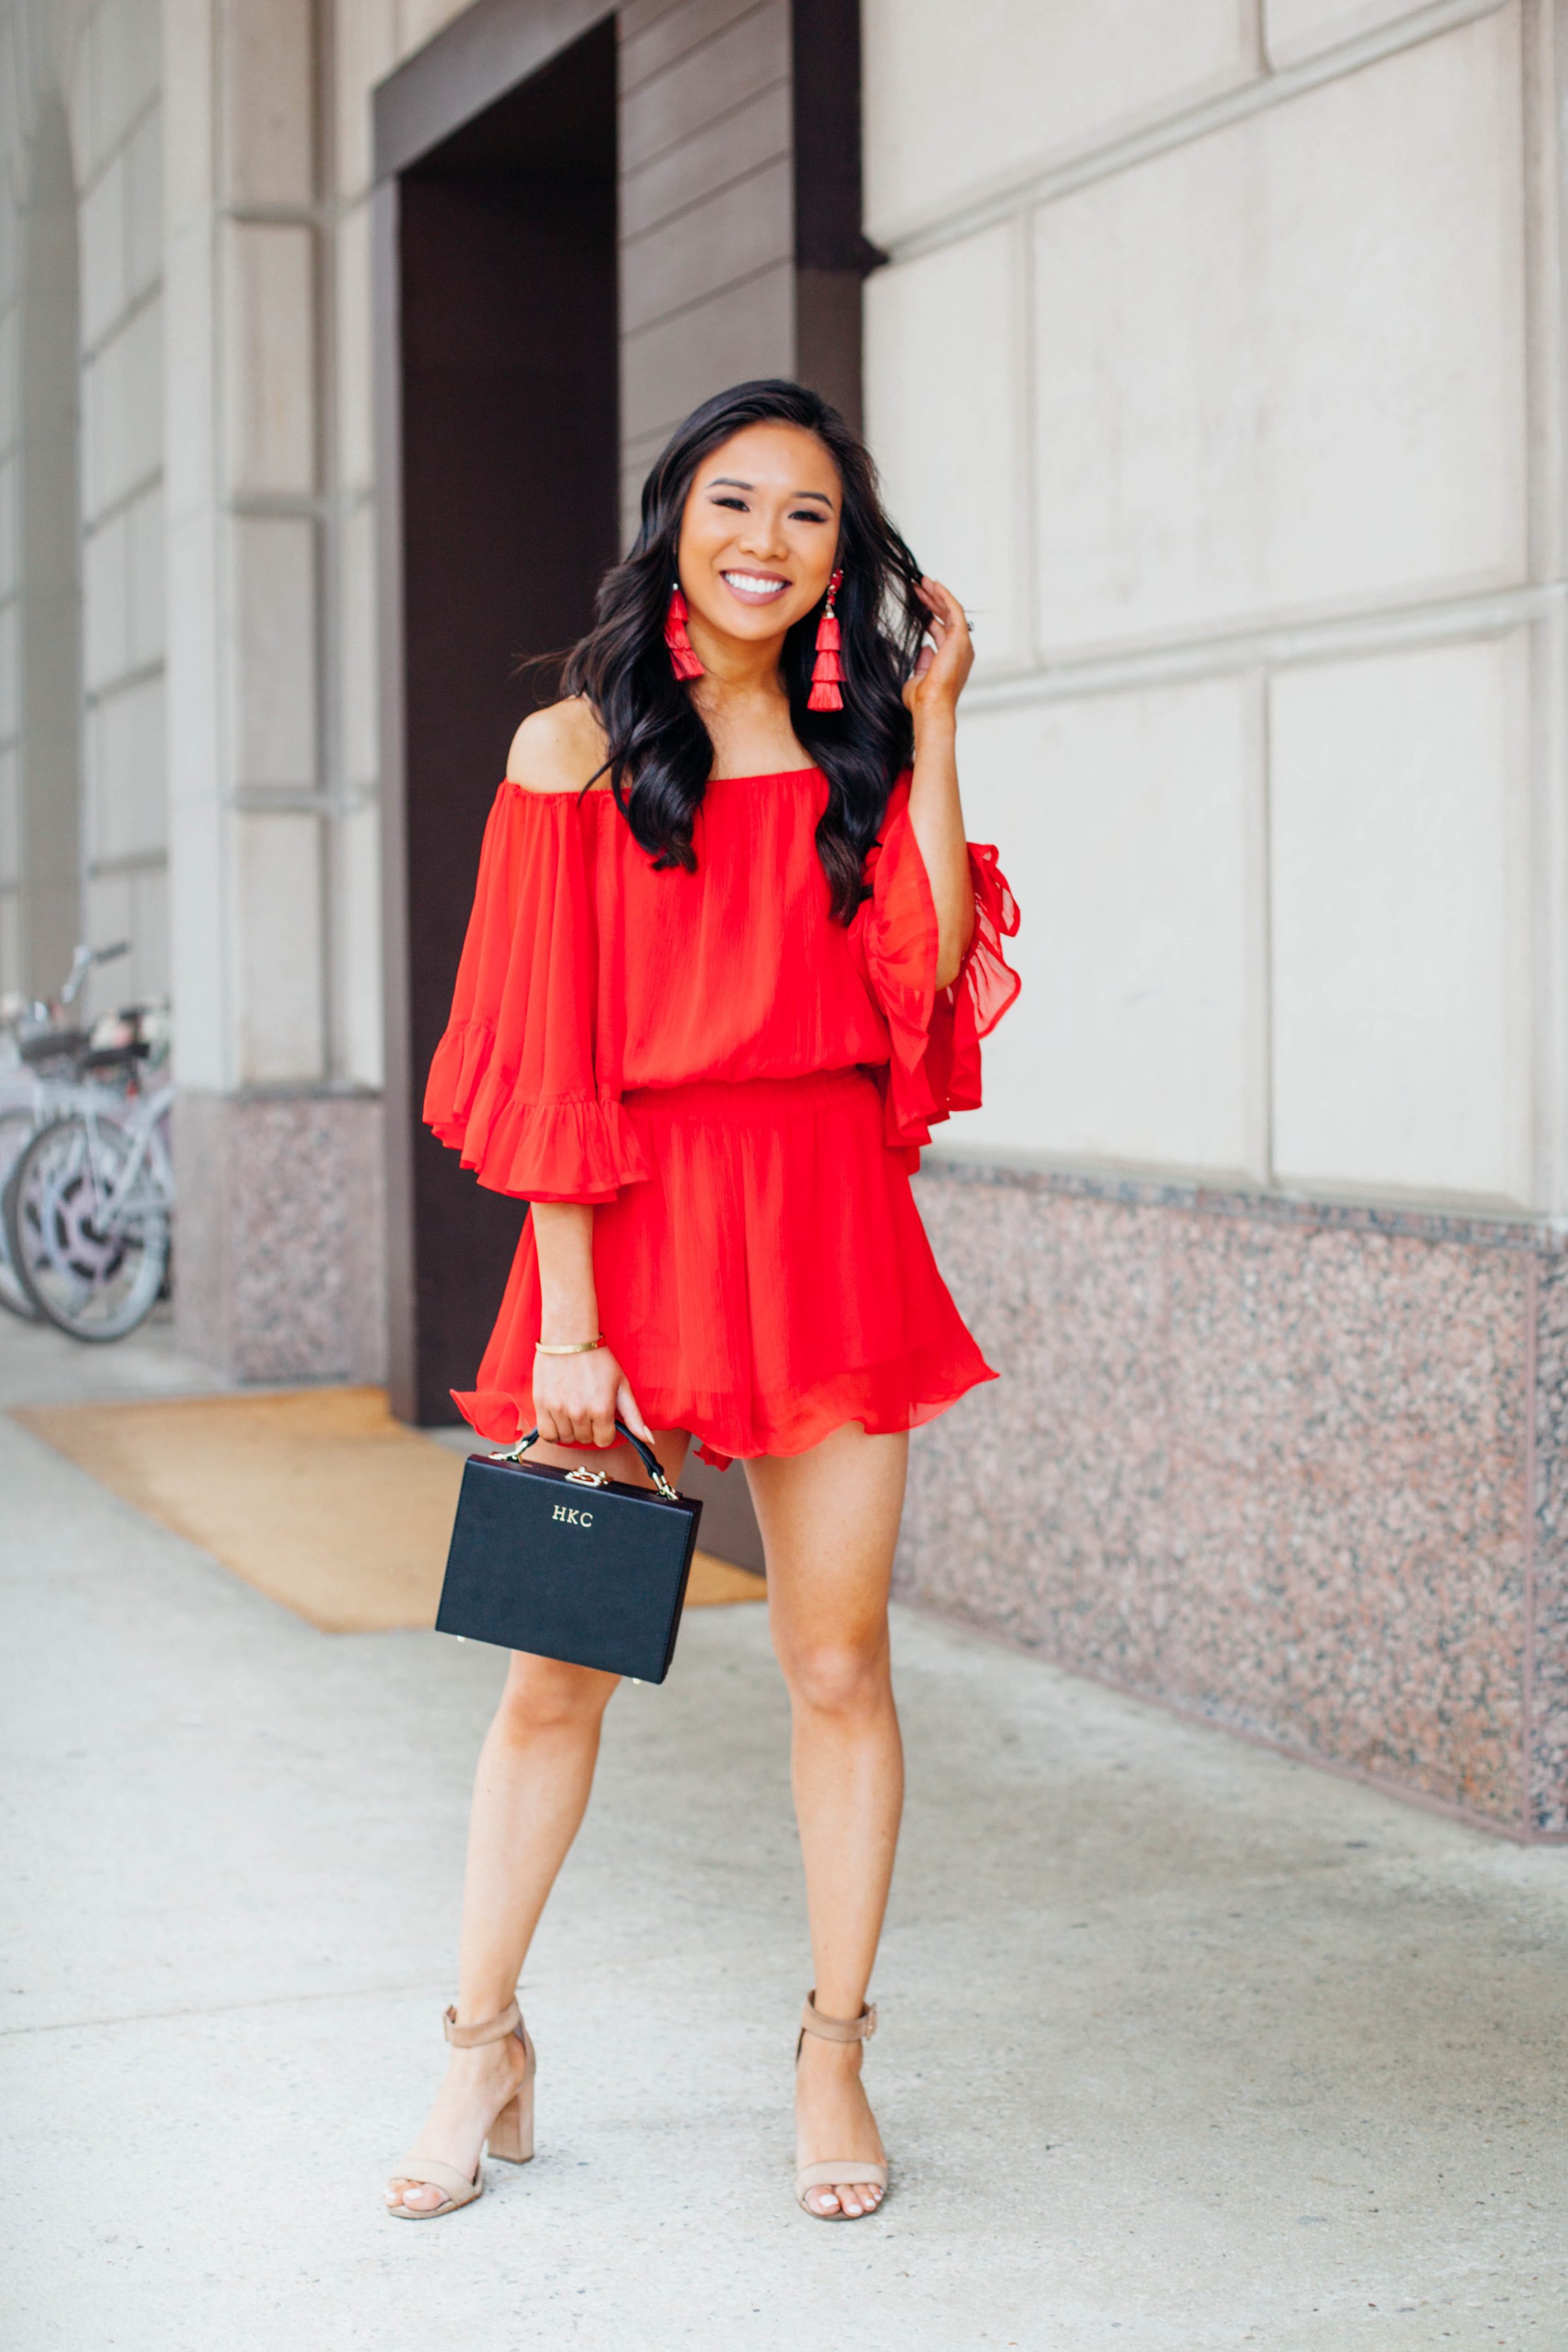 Lady in Red :: One shoulder jumpsuit & Rose clutch - Wendy's Lookbook